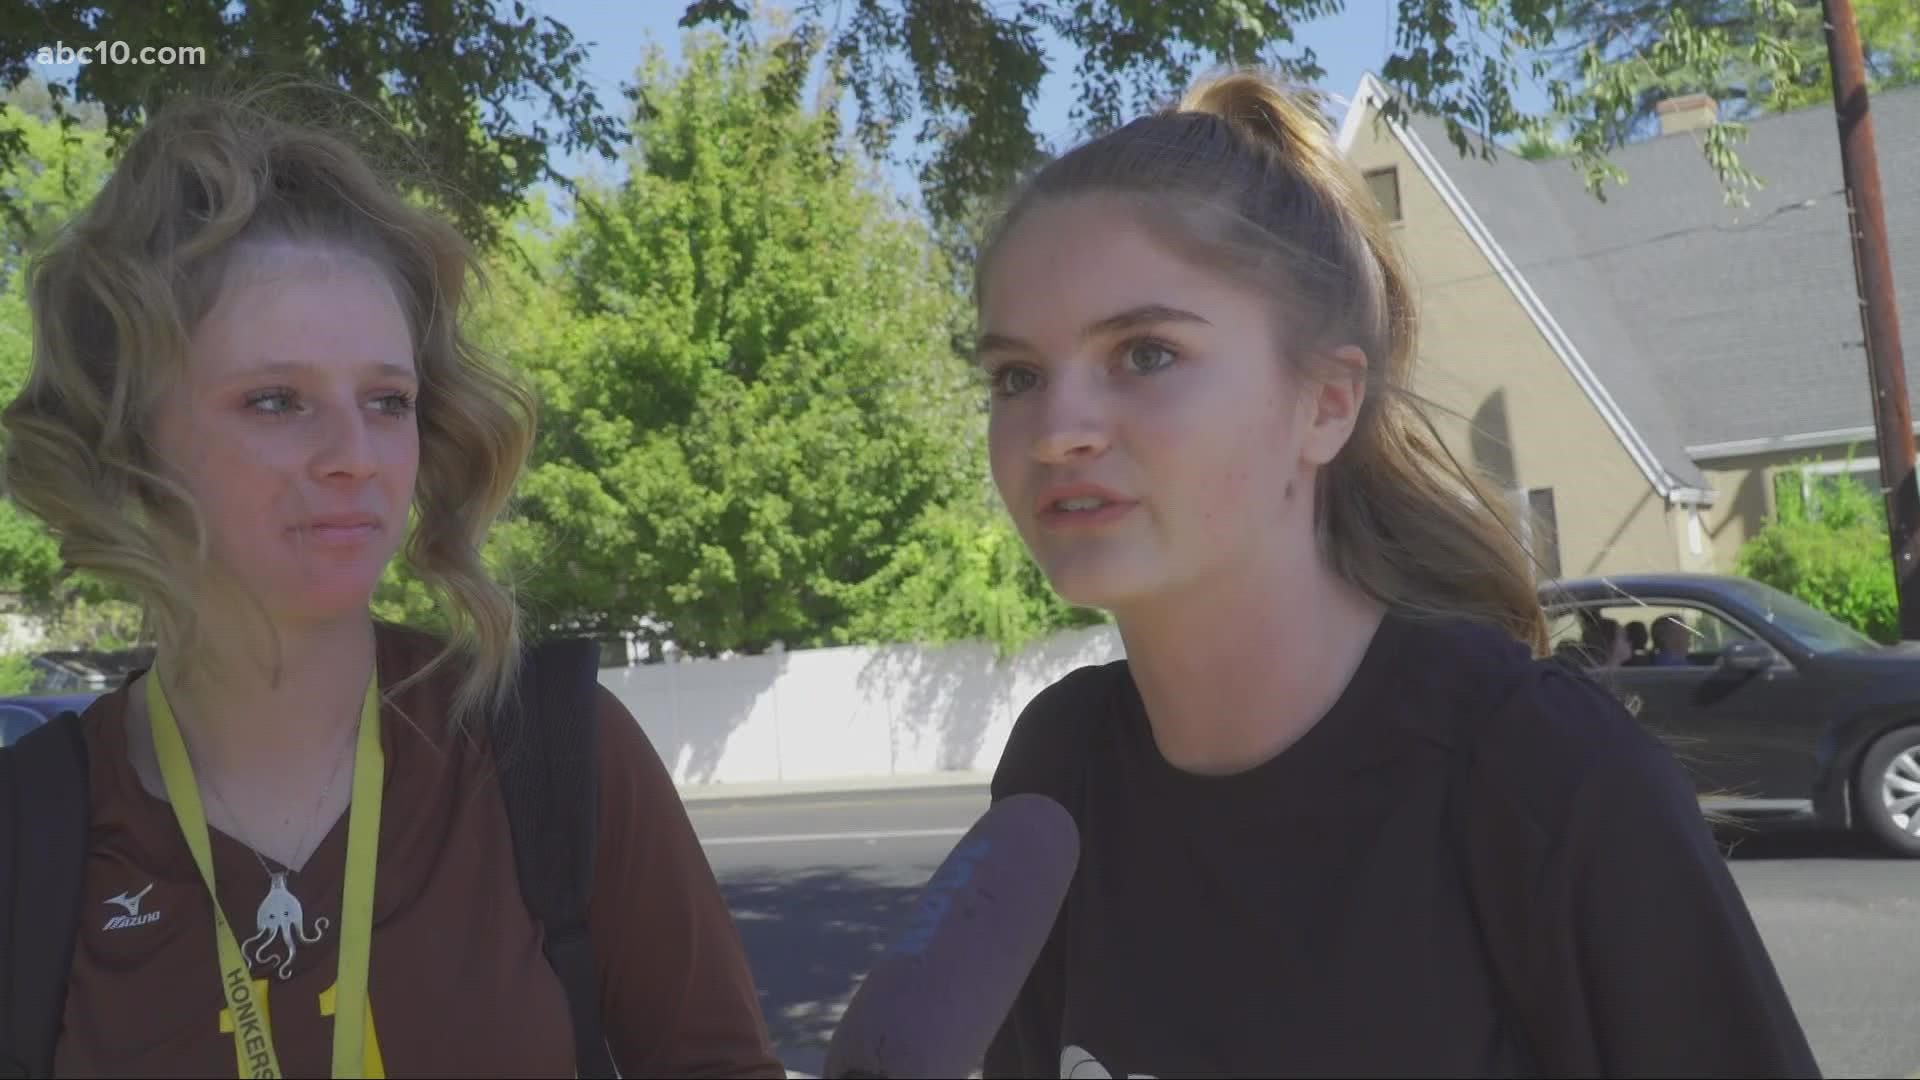 Students tell ABC10 they were sitting in the same classroom as the student who allegedly brought gun to school.